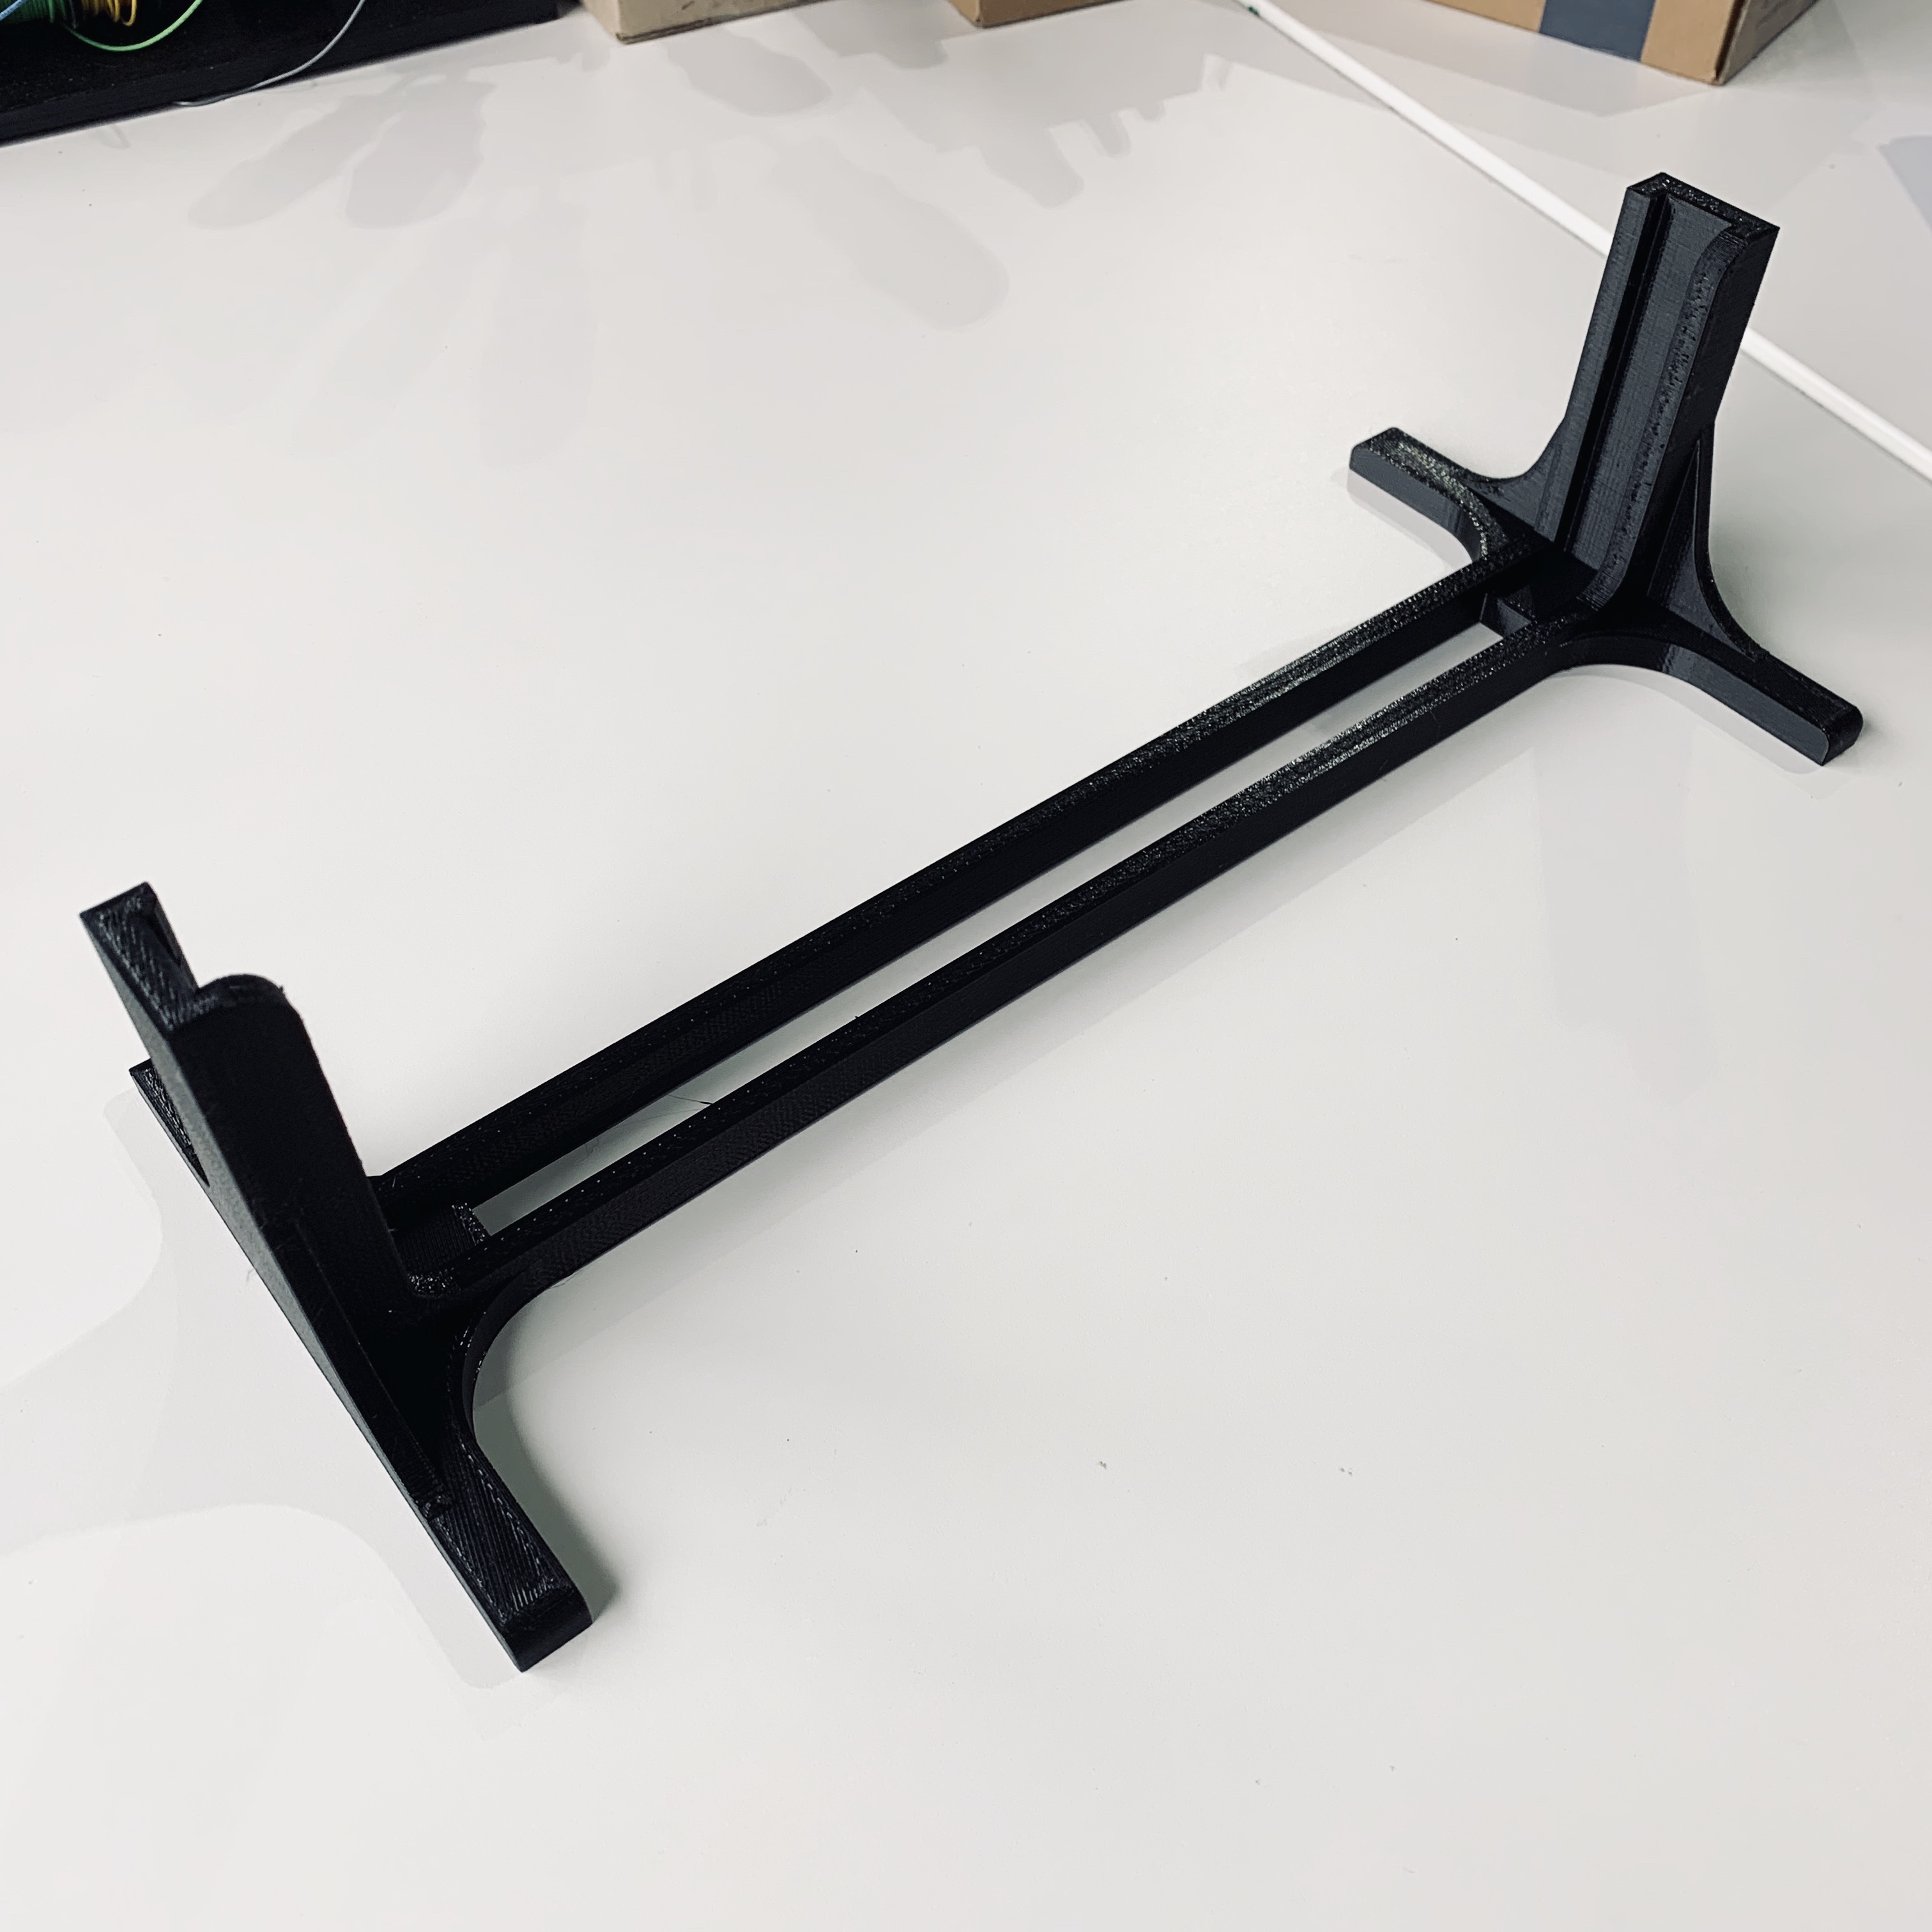 Simple vertical monitor mount / stand ( for 28" Samsung U28E59D monitor )